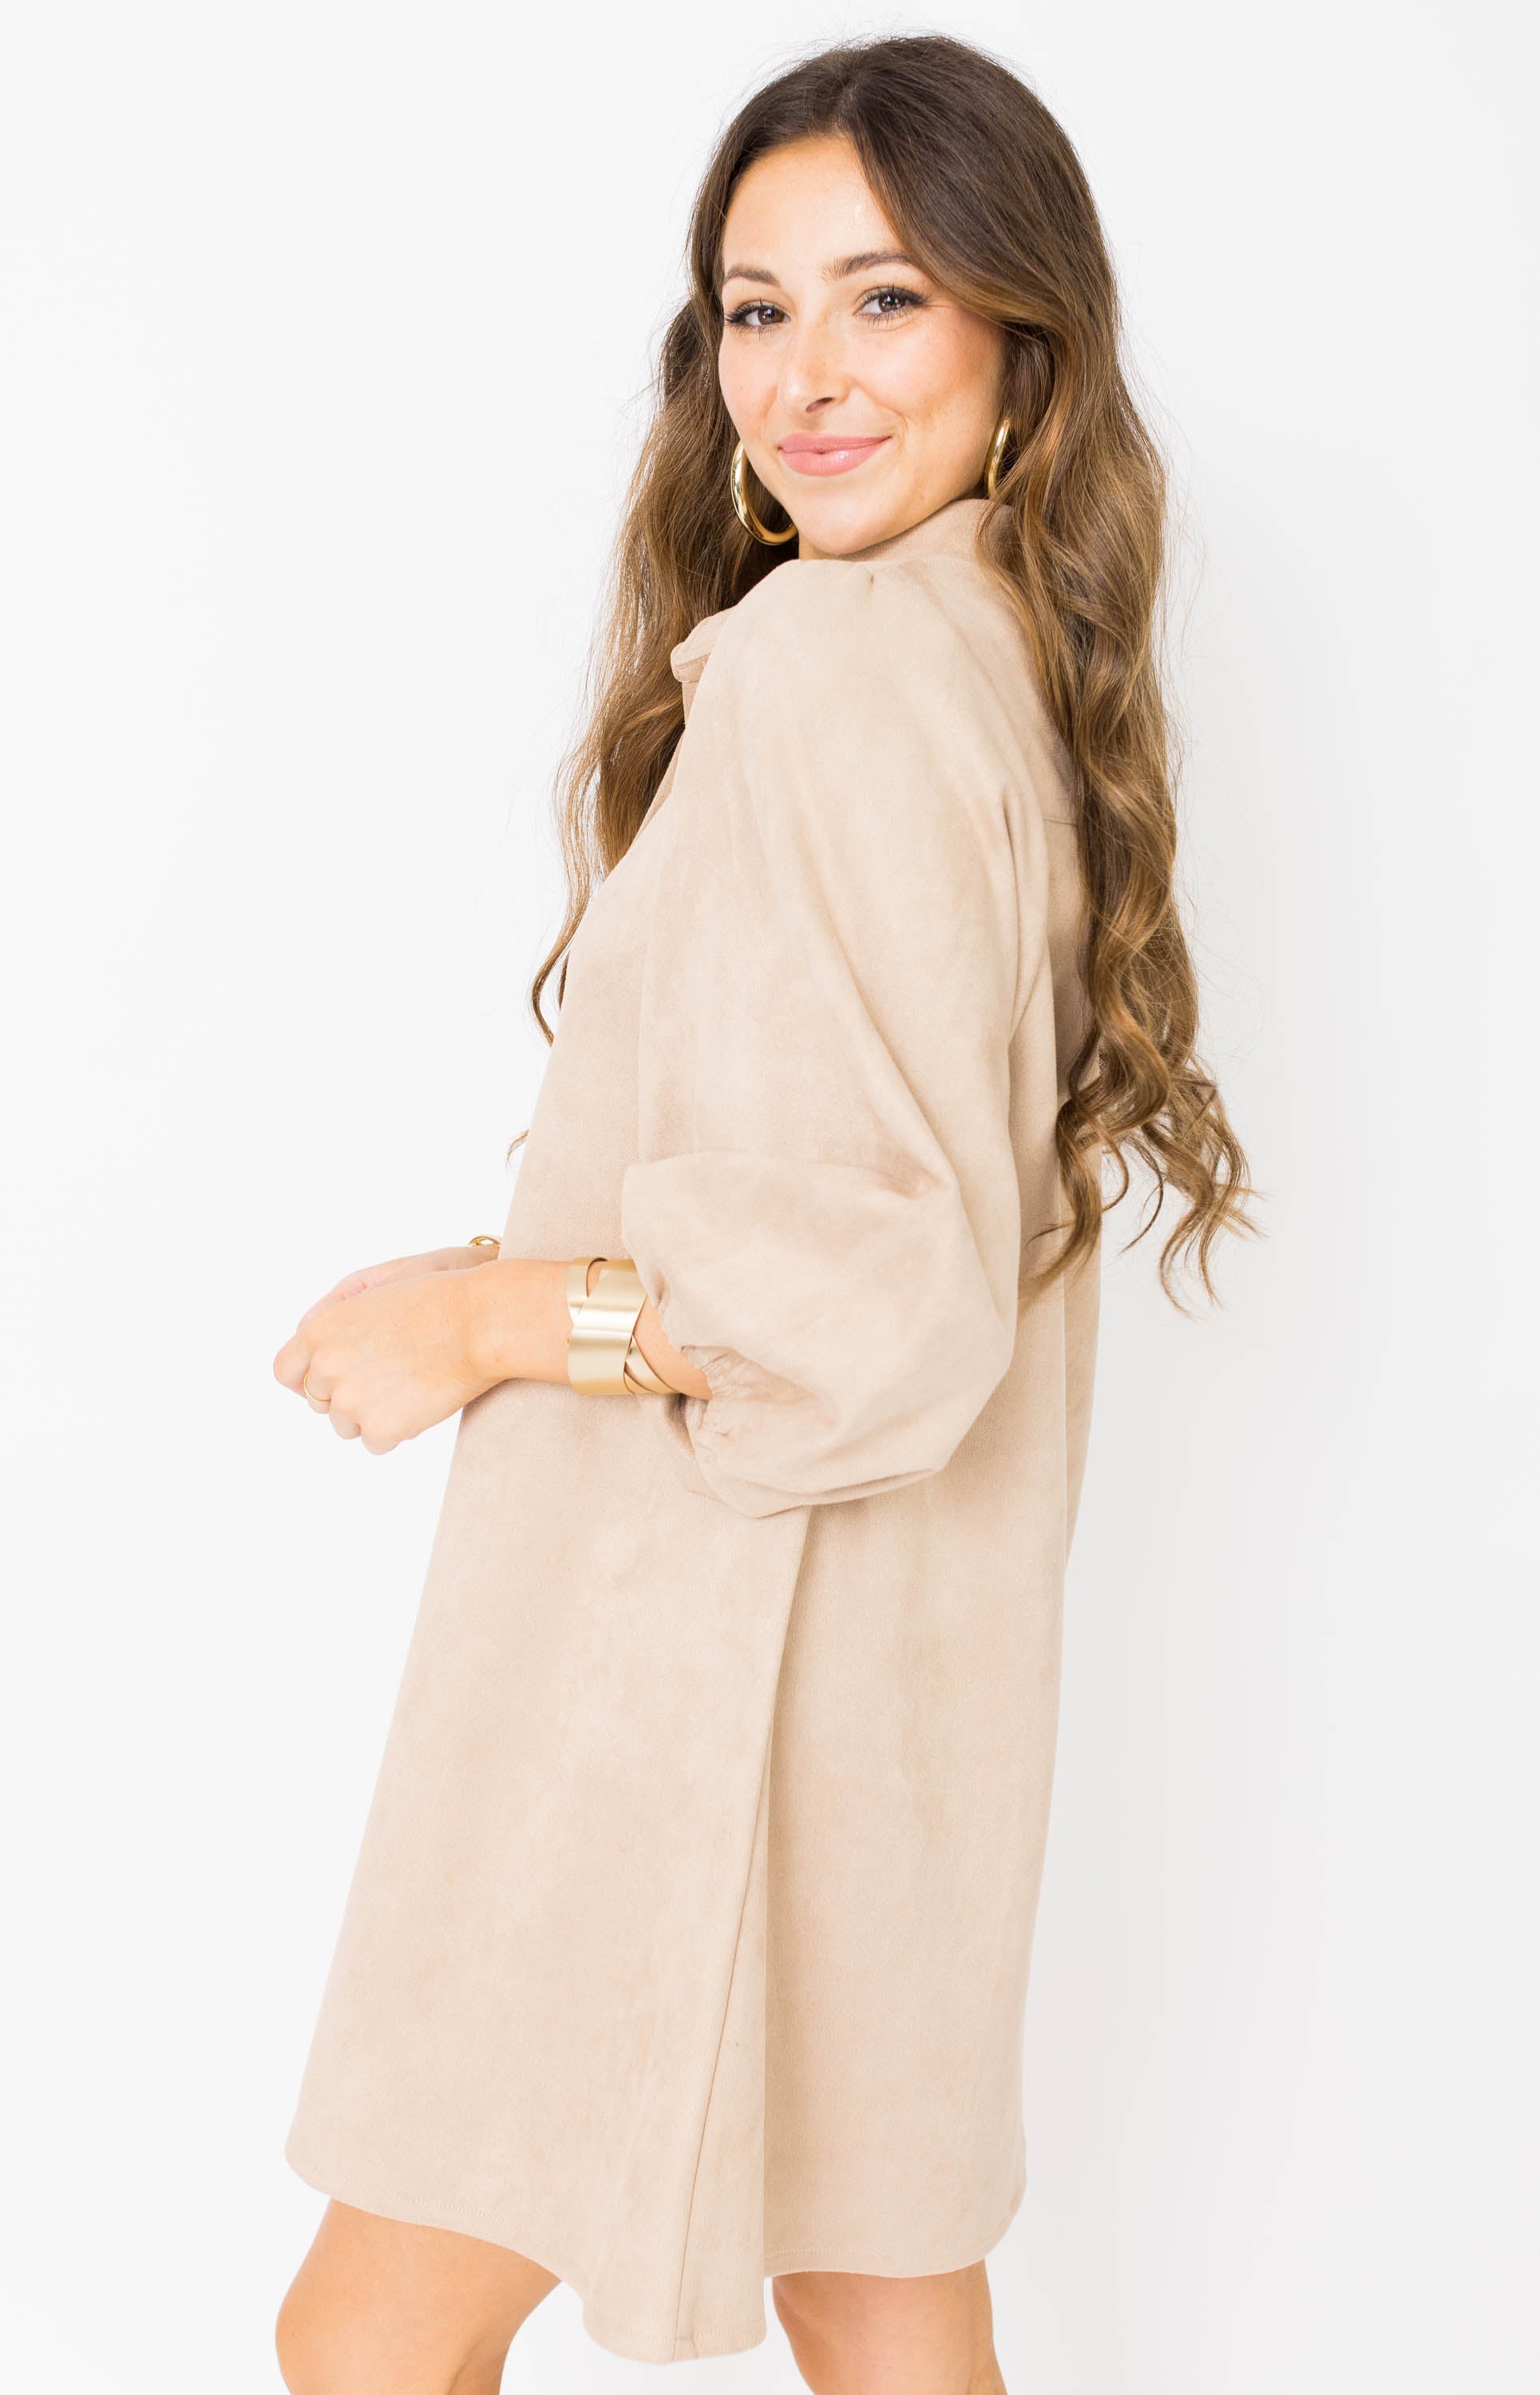 Dolce Cabo: Over the Moon Vegan Suede Mini Dress, CAMEL